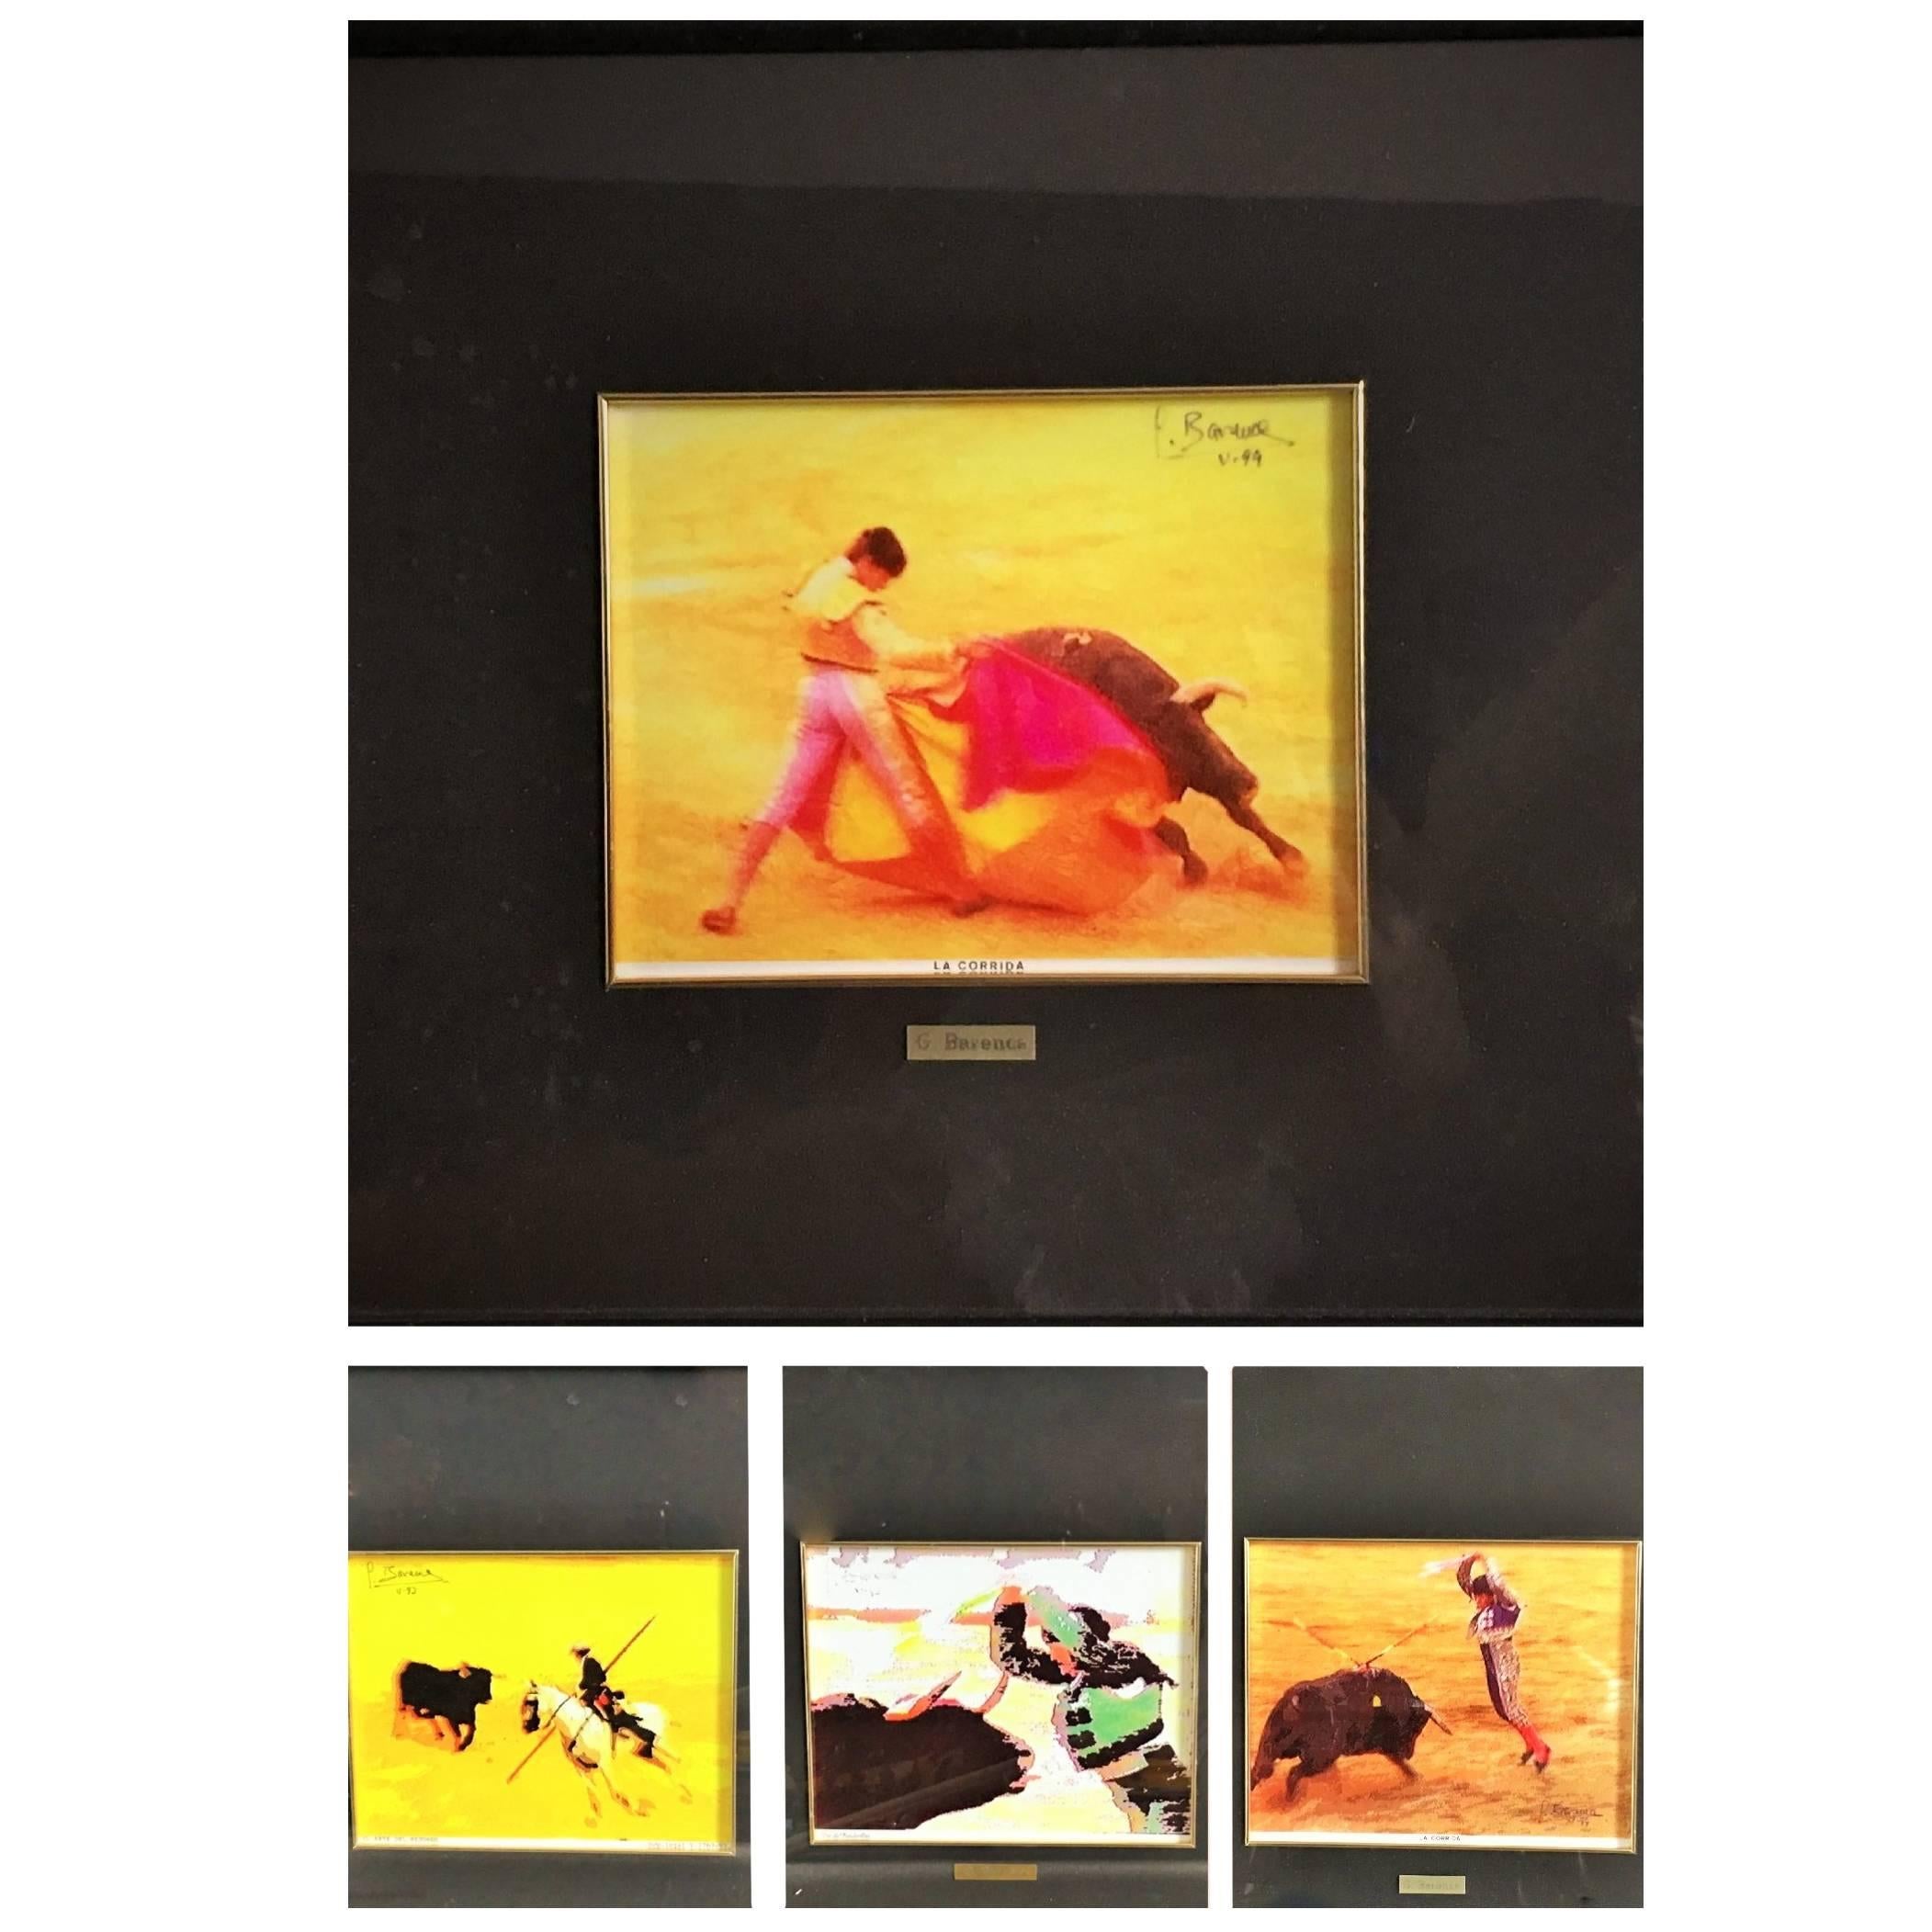 Barenca, 1994, Spain., Set of Four Lithography about Bull Fight For Sale